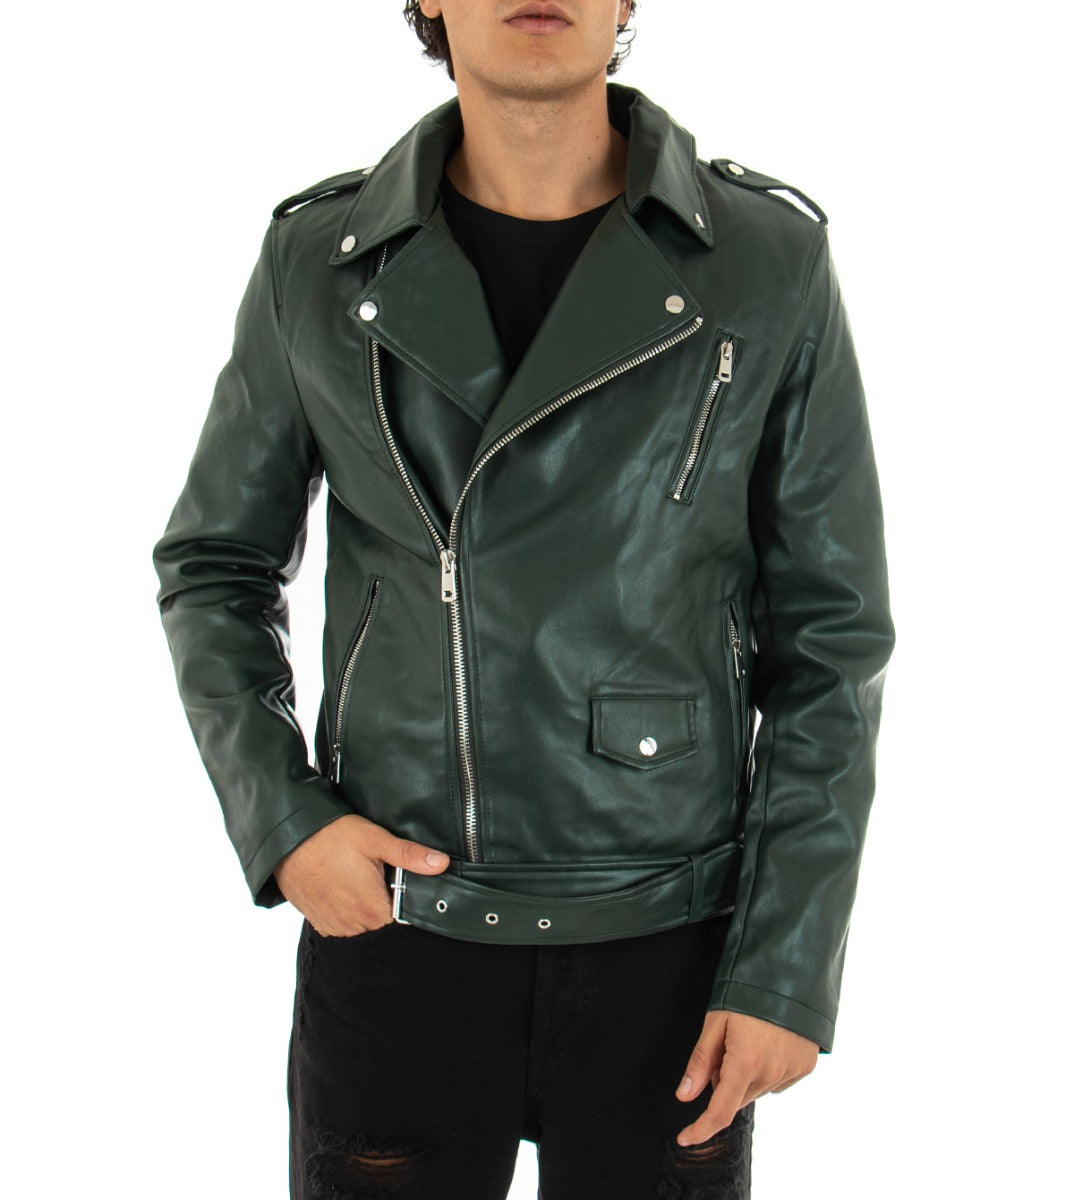 Men's Faux Leather Jacket Solid Color Green Casual Biker Long Sleeves GIOSAL